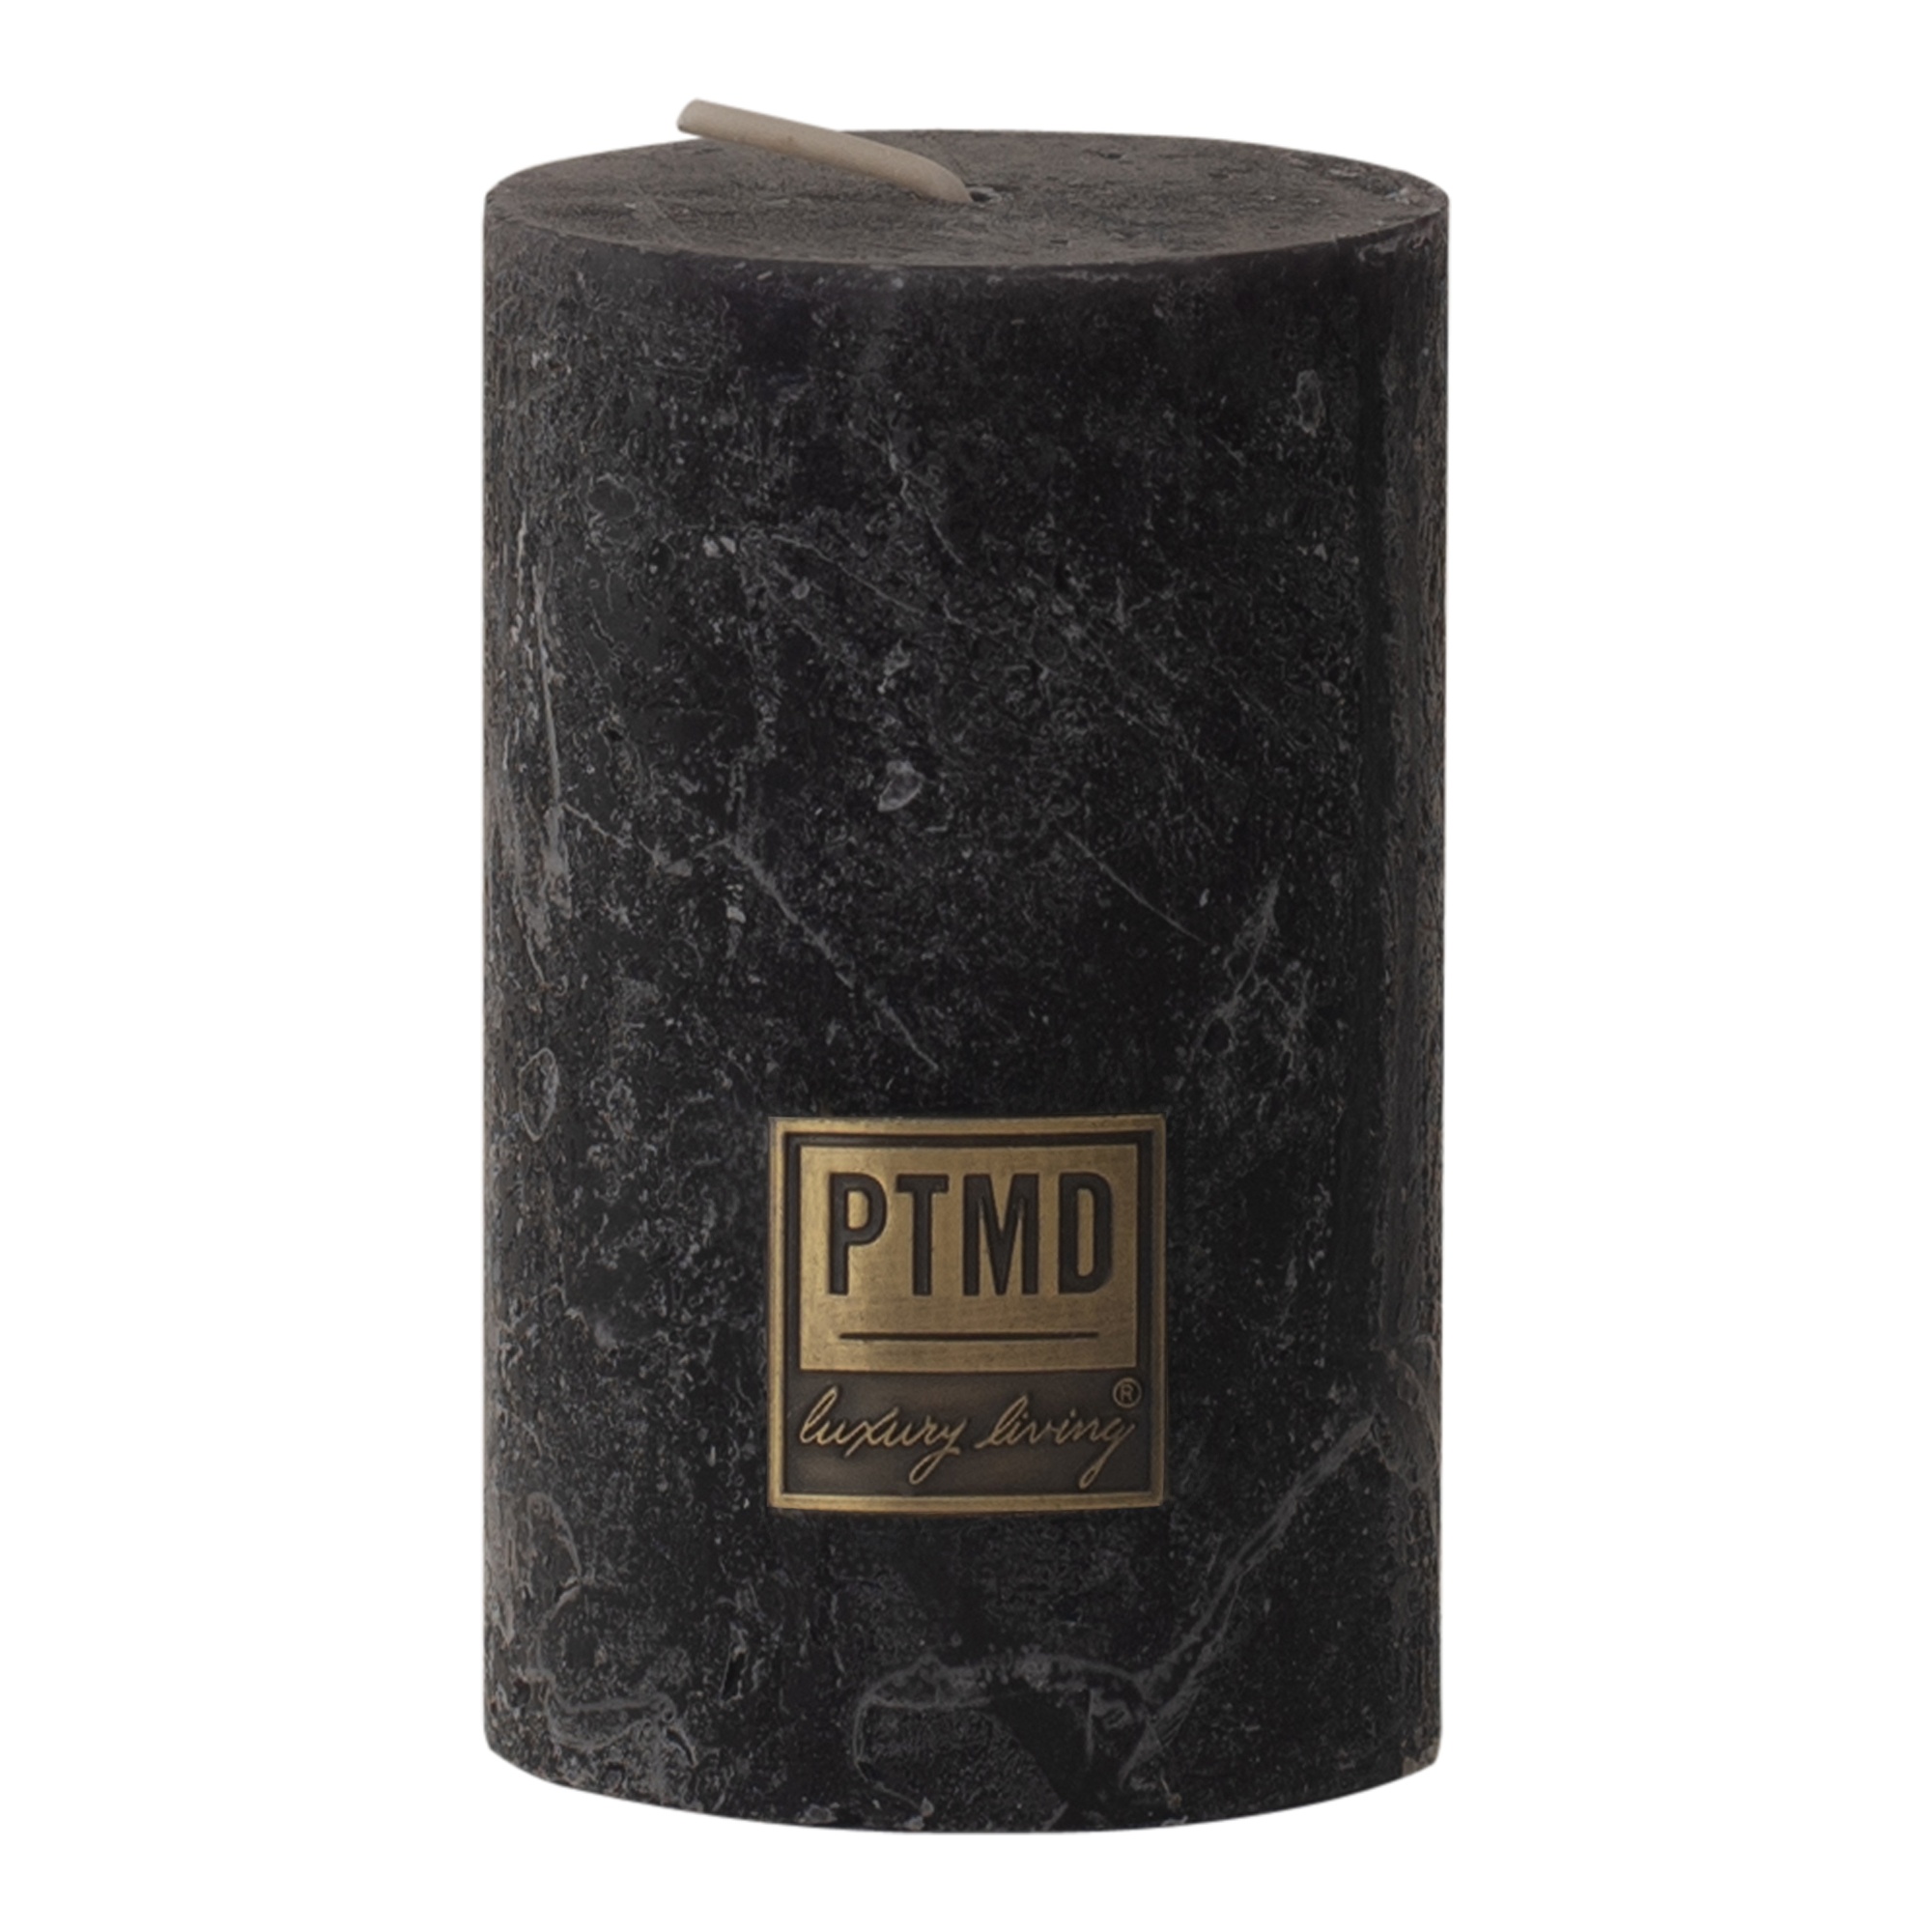 ptmd-rustic-charcoal-black-pillar-candle